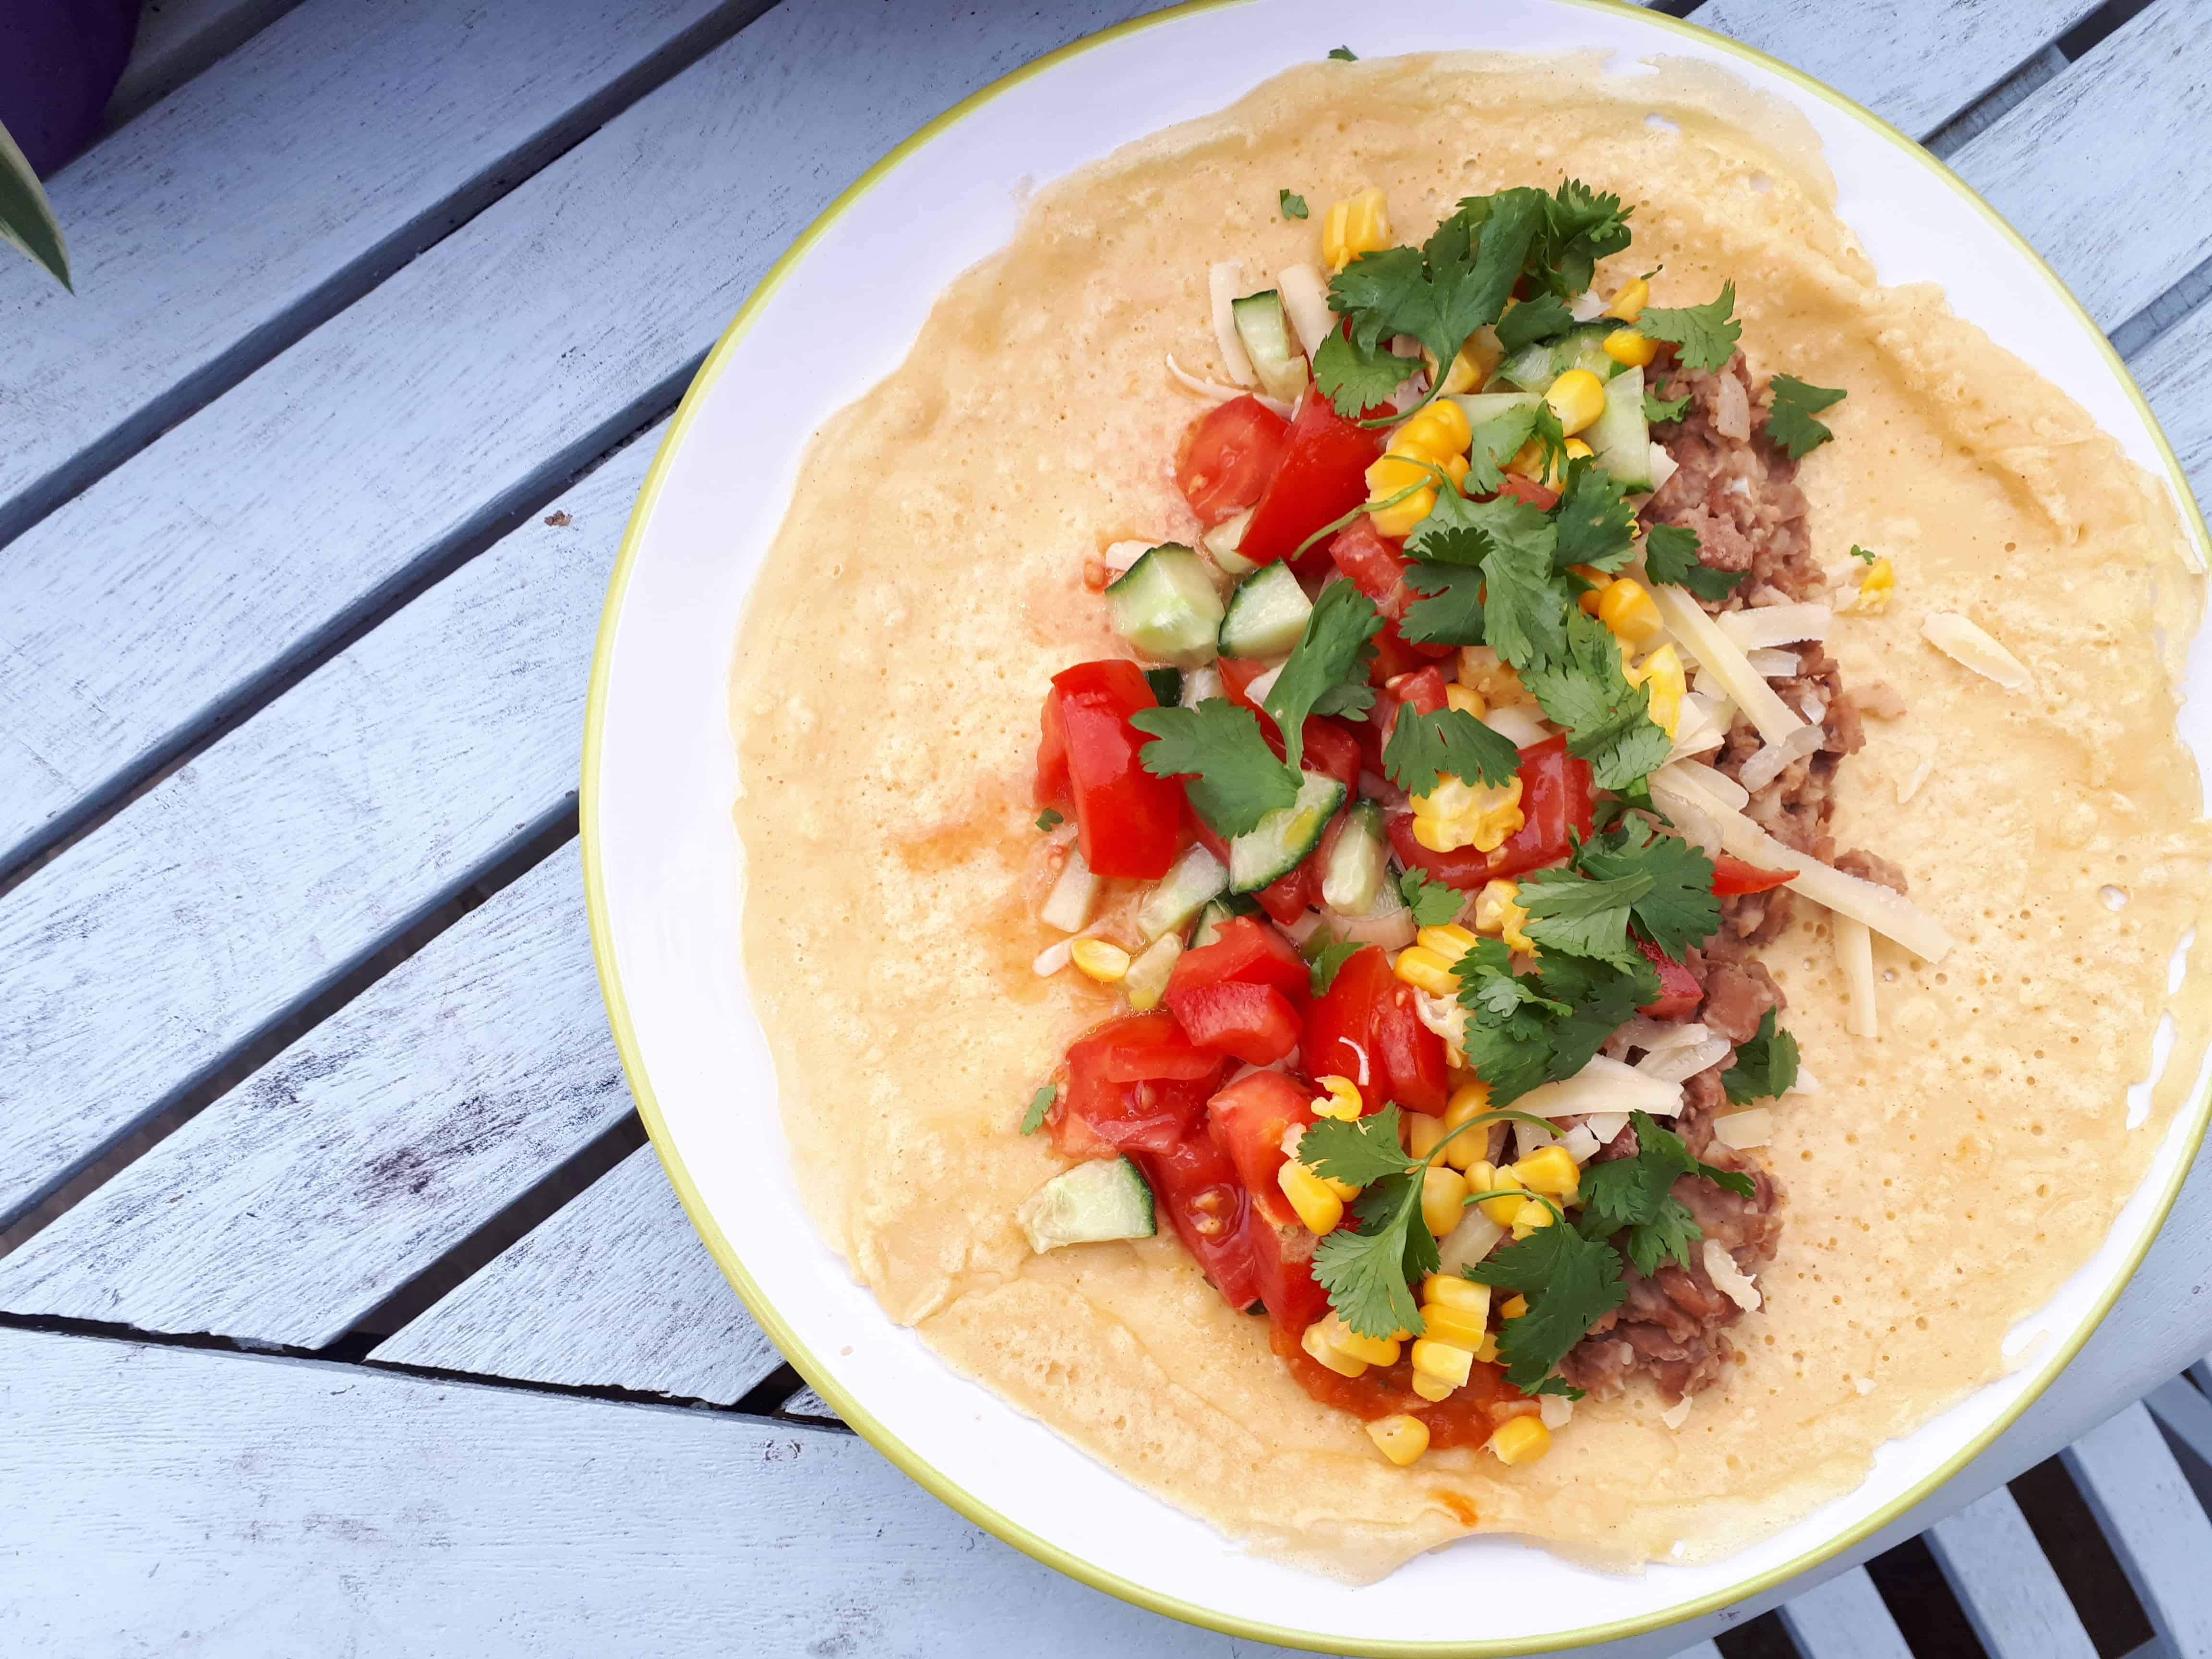 gram flour wrap with tomatoes, sweetcorn, refried beans, coriander and cheese, against a light blue table